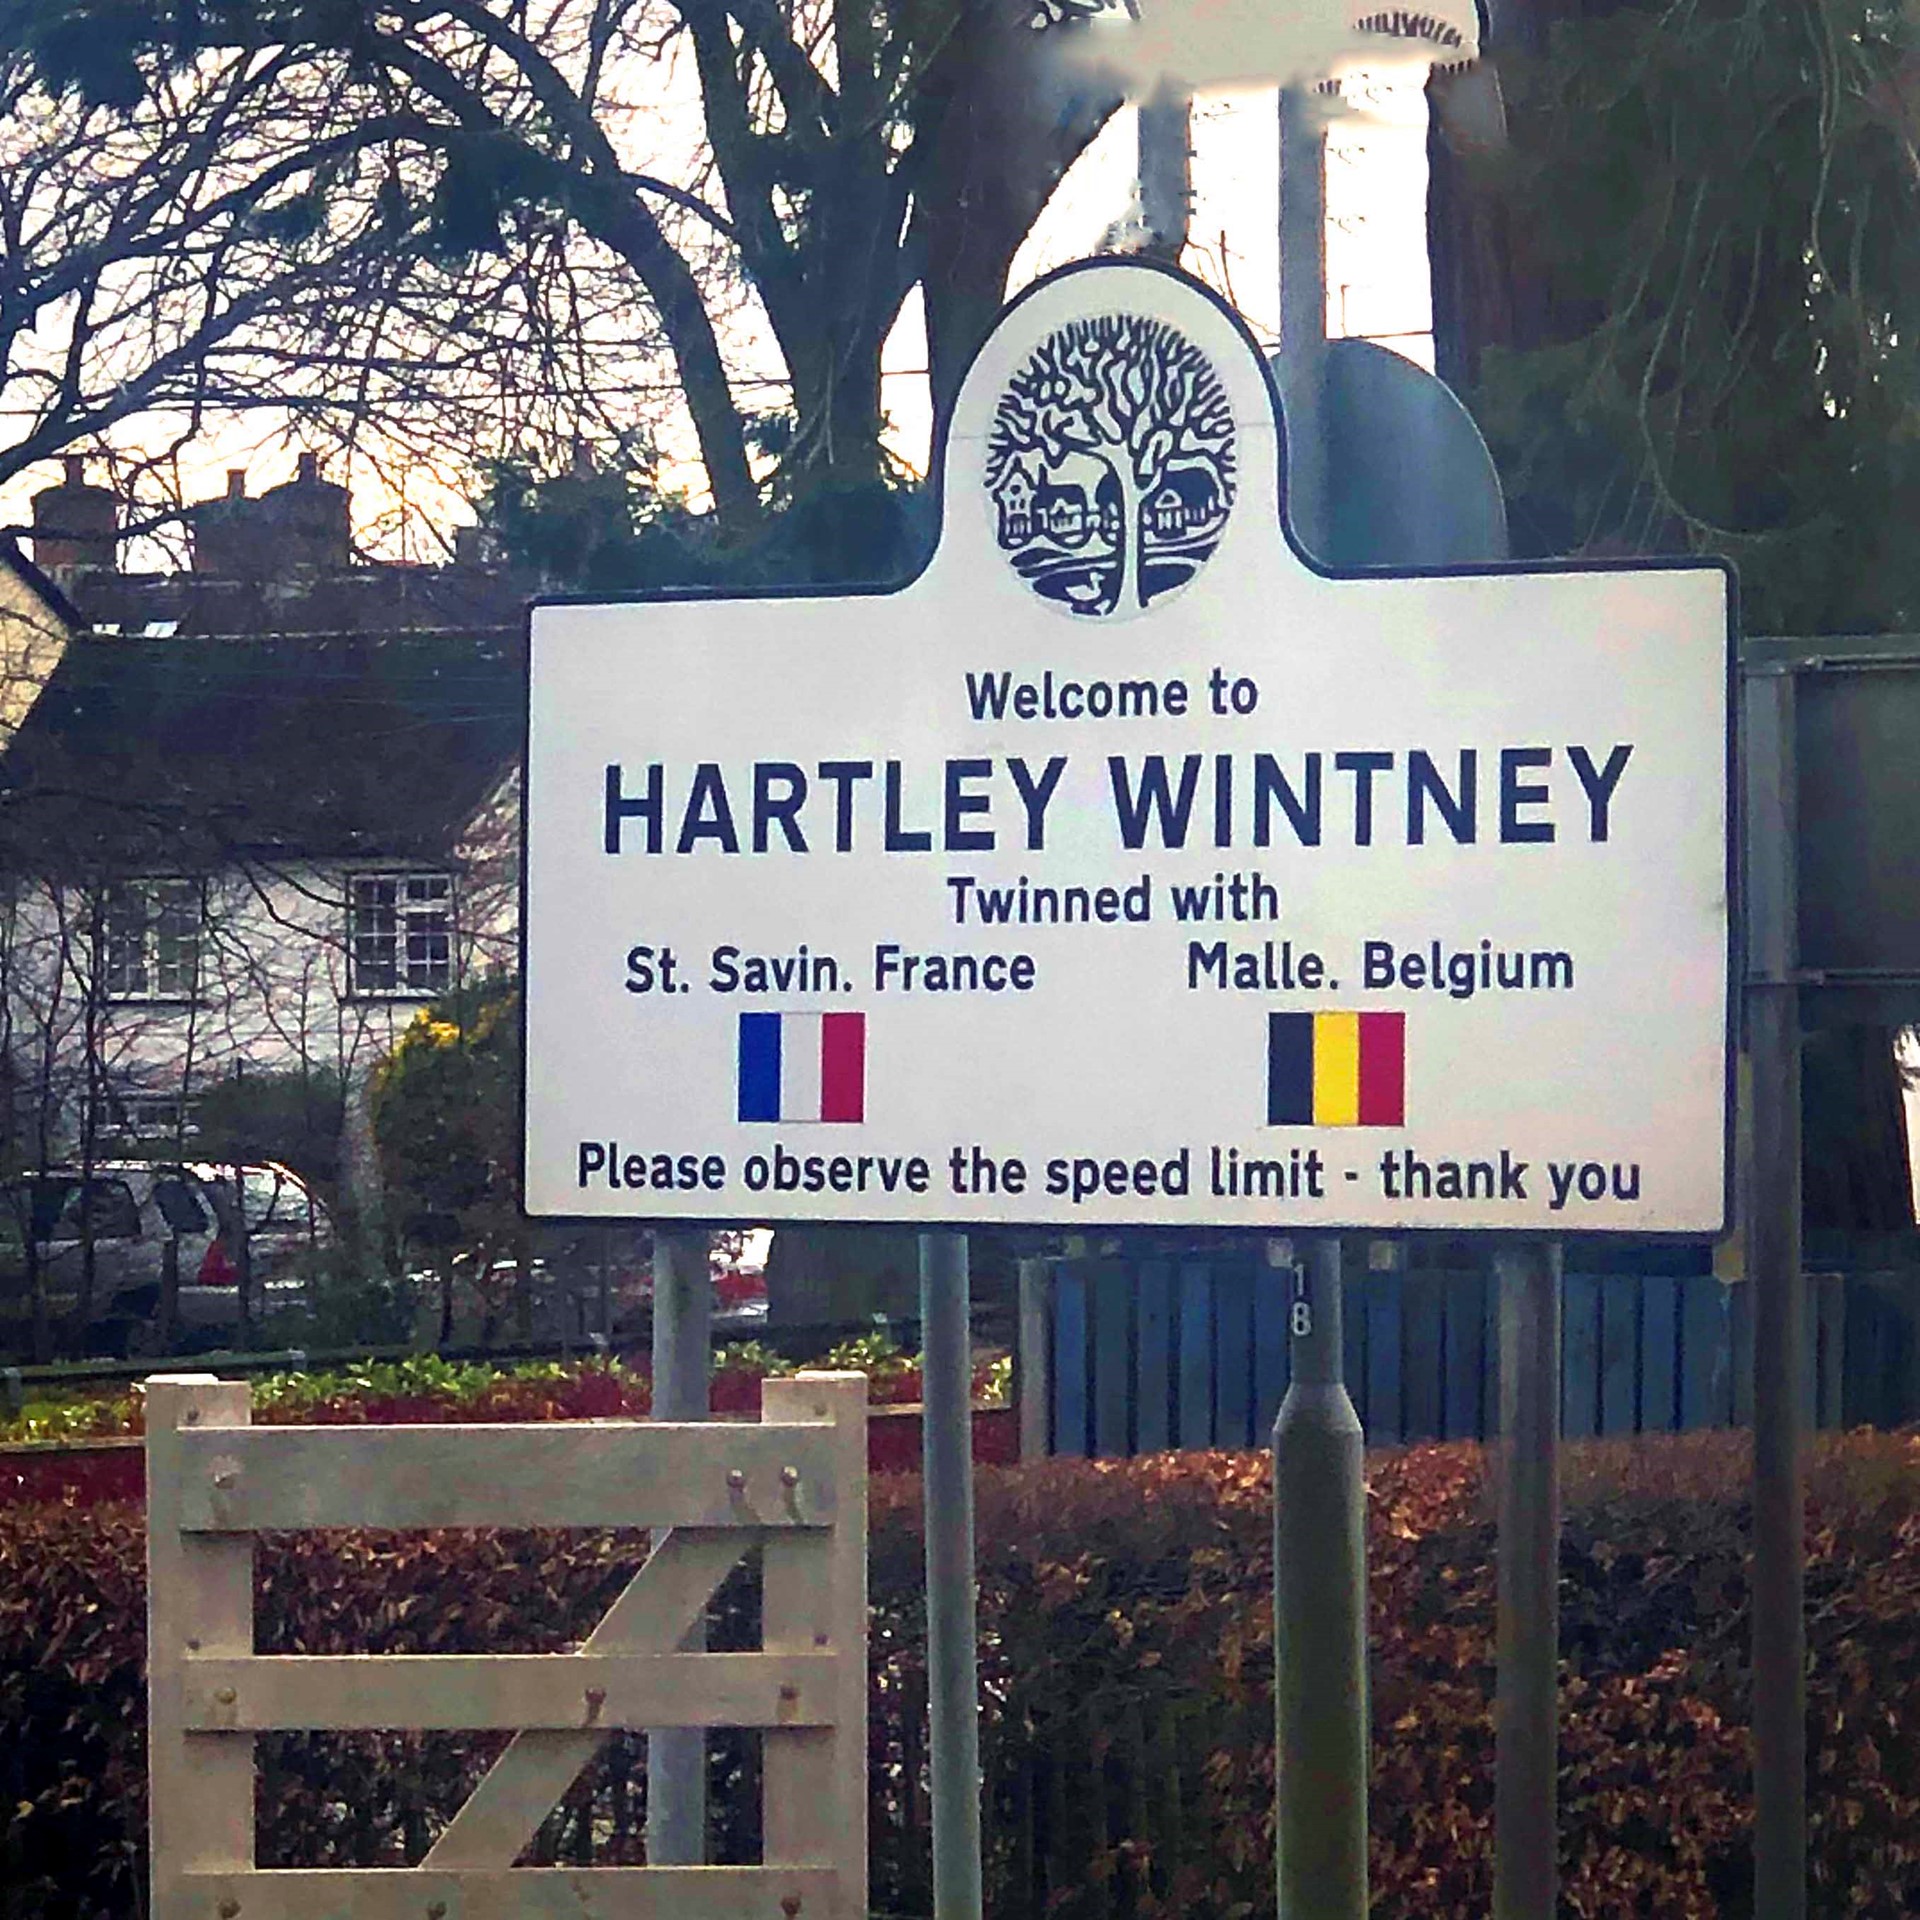 Picture of a road sign welcoming people to Hartley Wintney